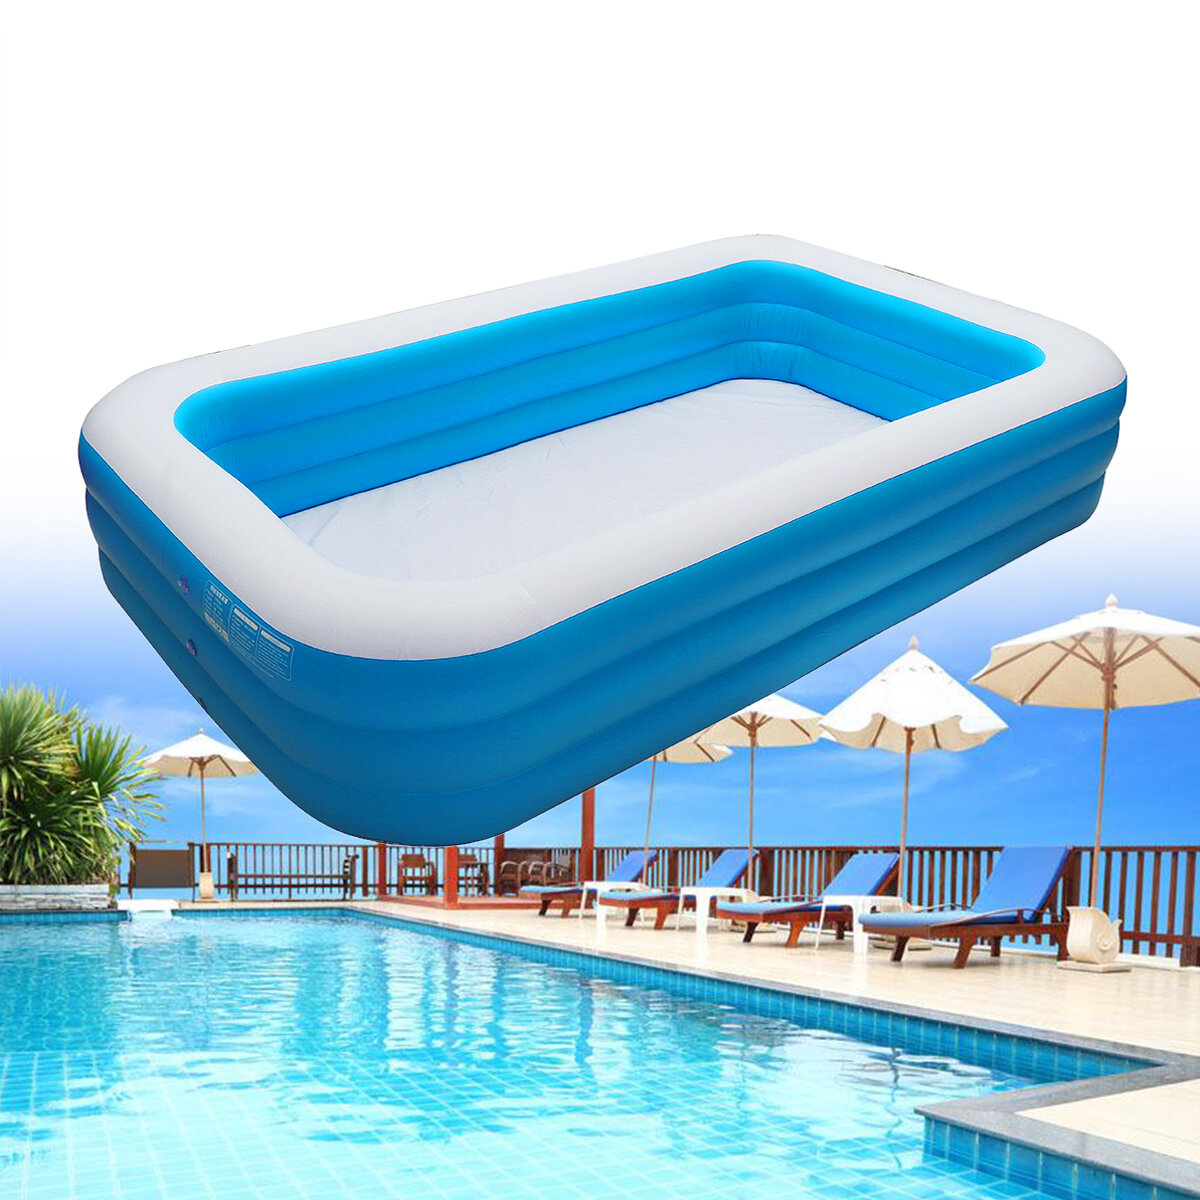 

210/180/150/130CM 3-layer Inflatable Swimming Pool Portable Outdoor Adult Children Summer Children Water Toys